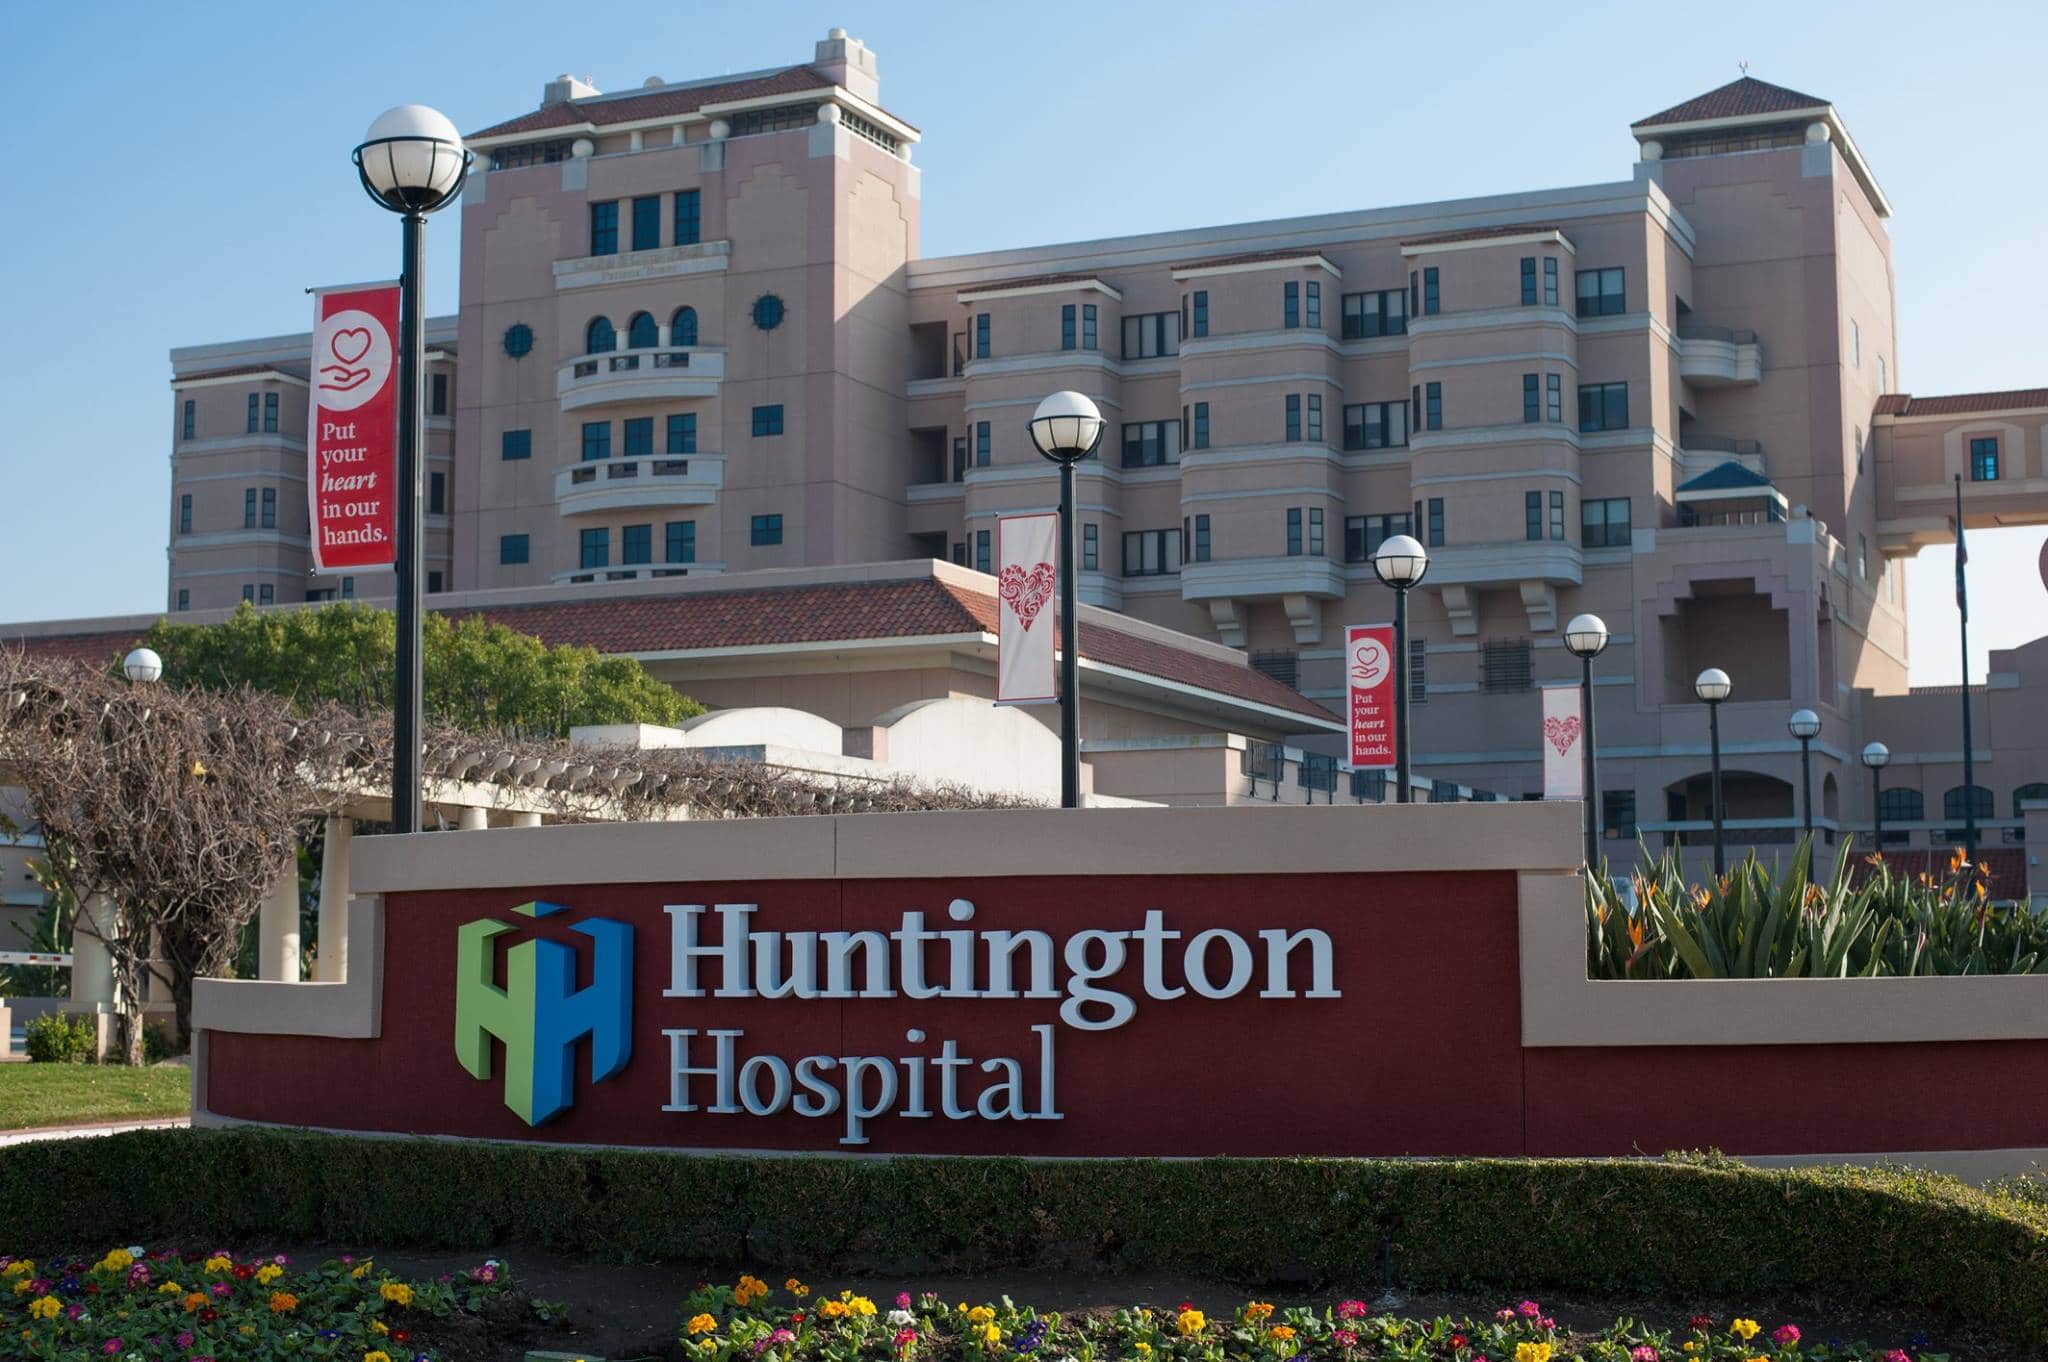 U.S. News & World Report Names Huntington Hospital 5th Best Hospital in Los Angeles and 10th Best Hospital in California